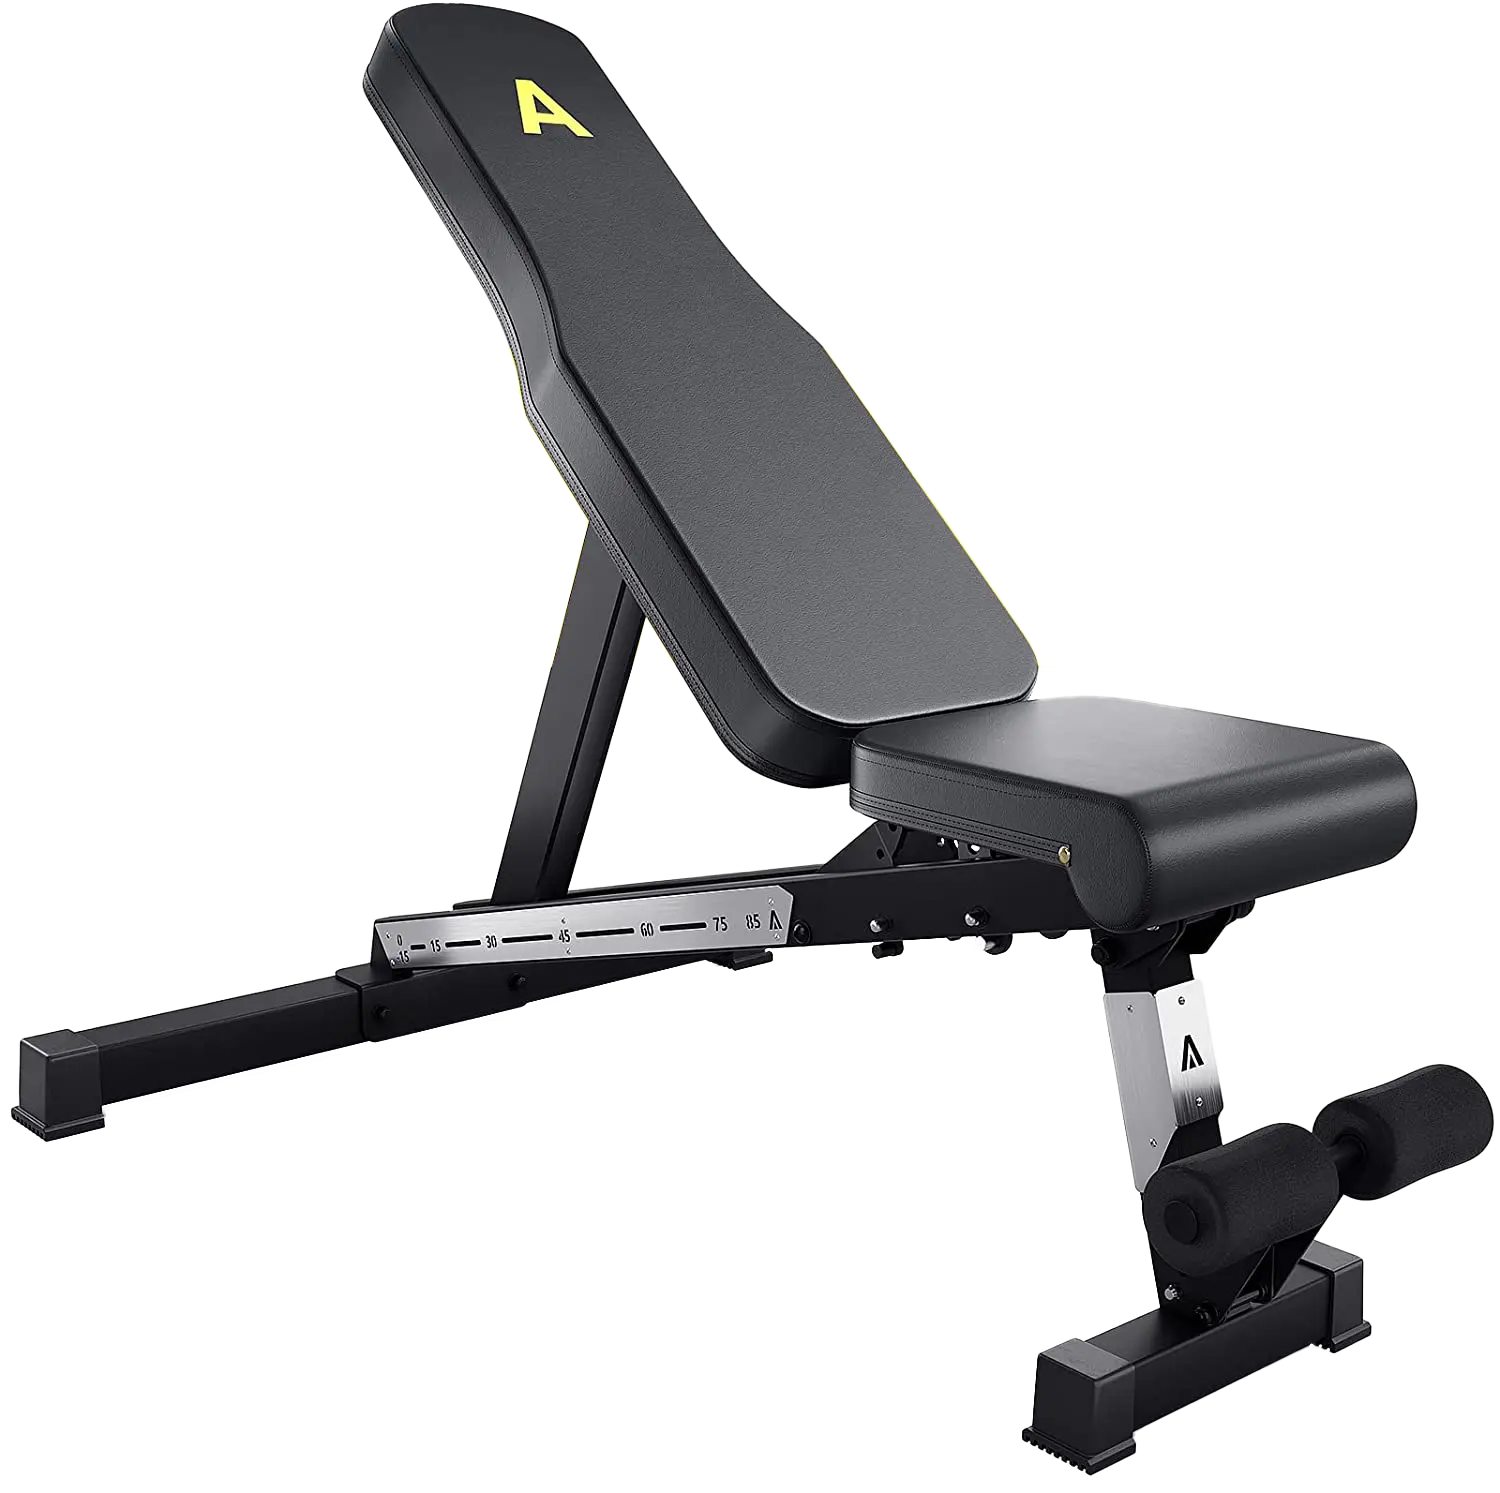 The AboveGenius Adjustable Bench has a synthetic leather seat and backrest in black with a neon yellow logo on the backrest, the backrest is in a neutral 45 deg. Three quarters of the background is white with the second quarter from the top featuring a horizontal neon yellow strip.